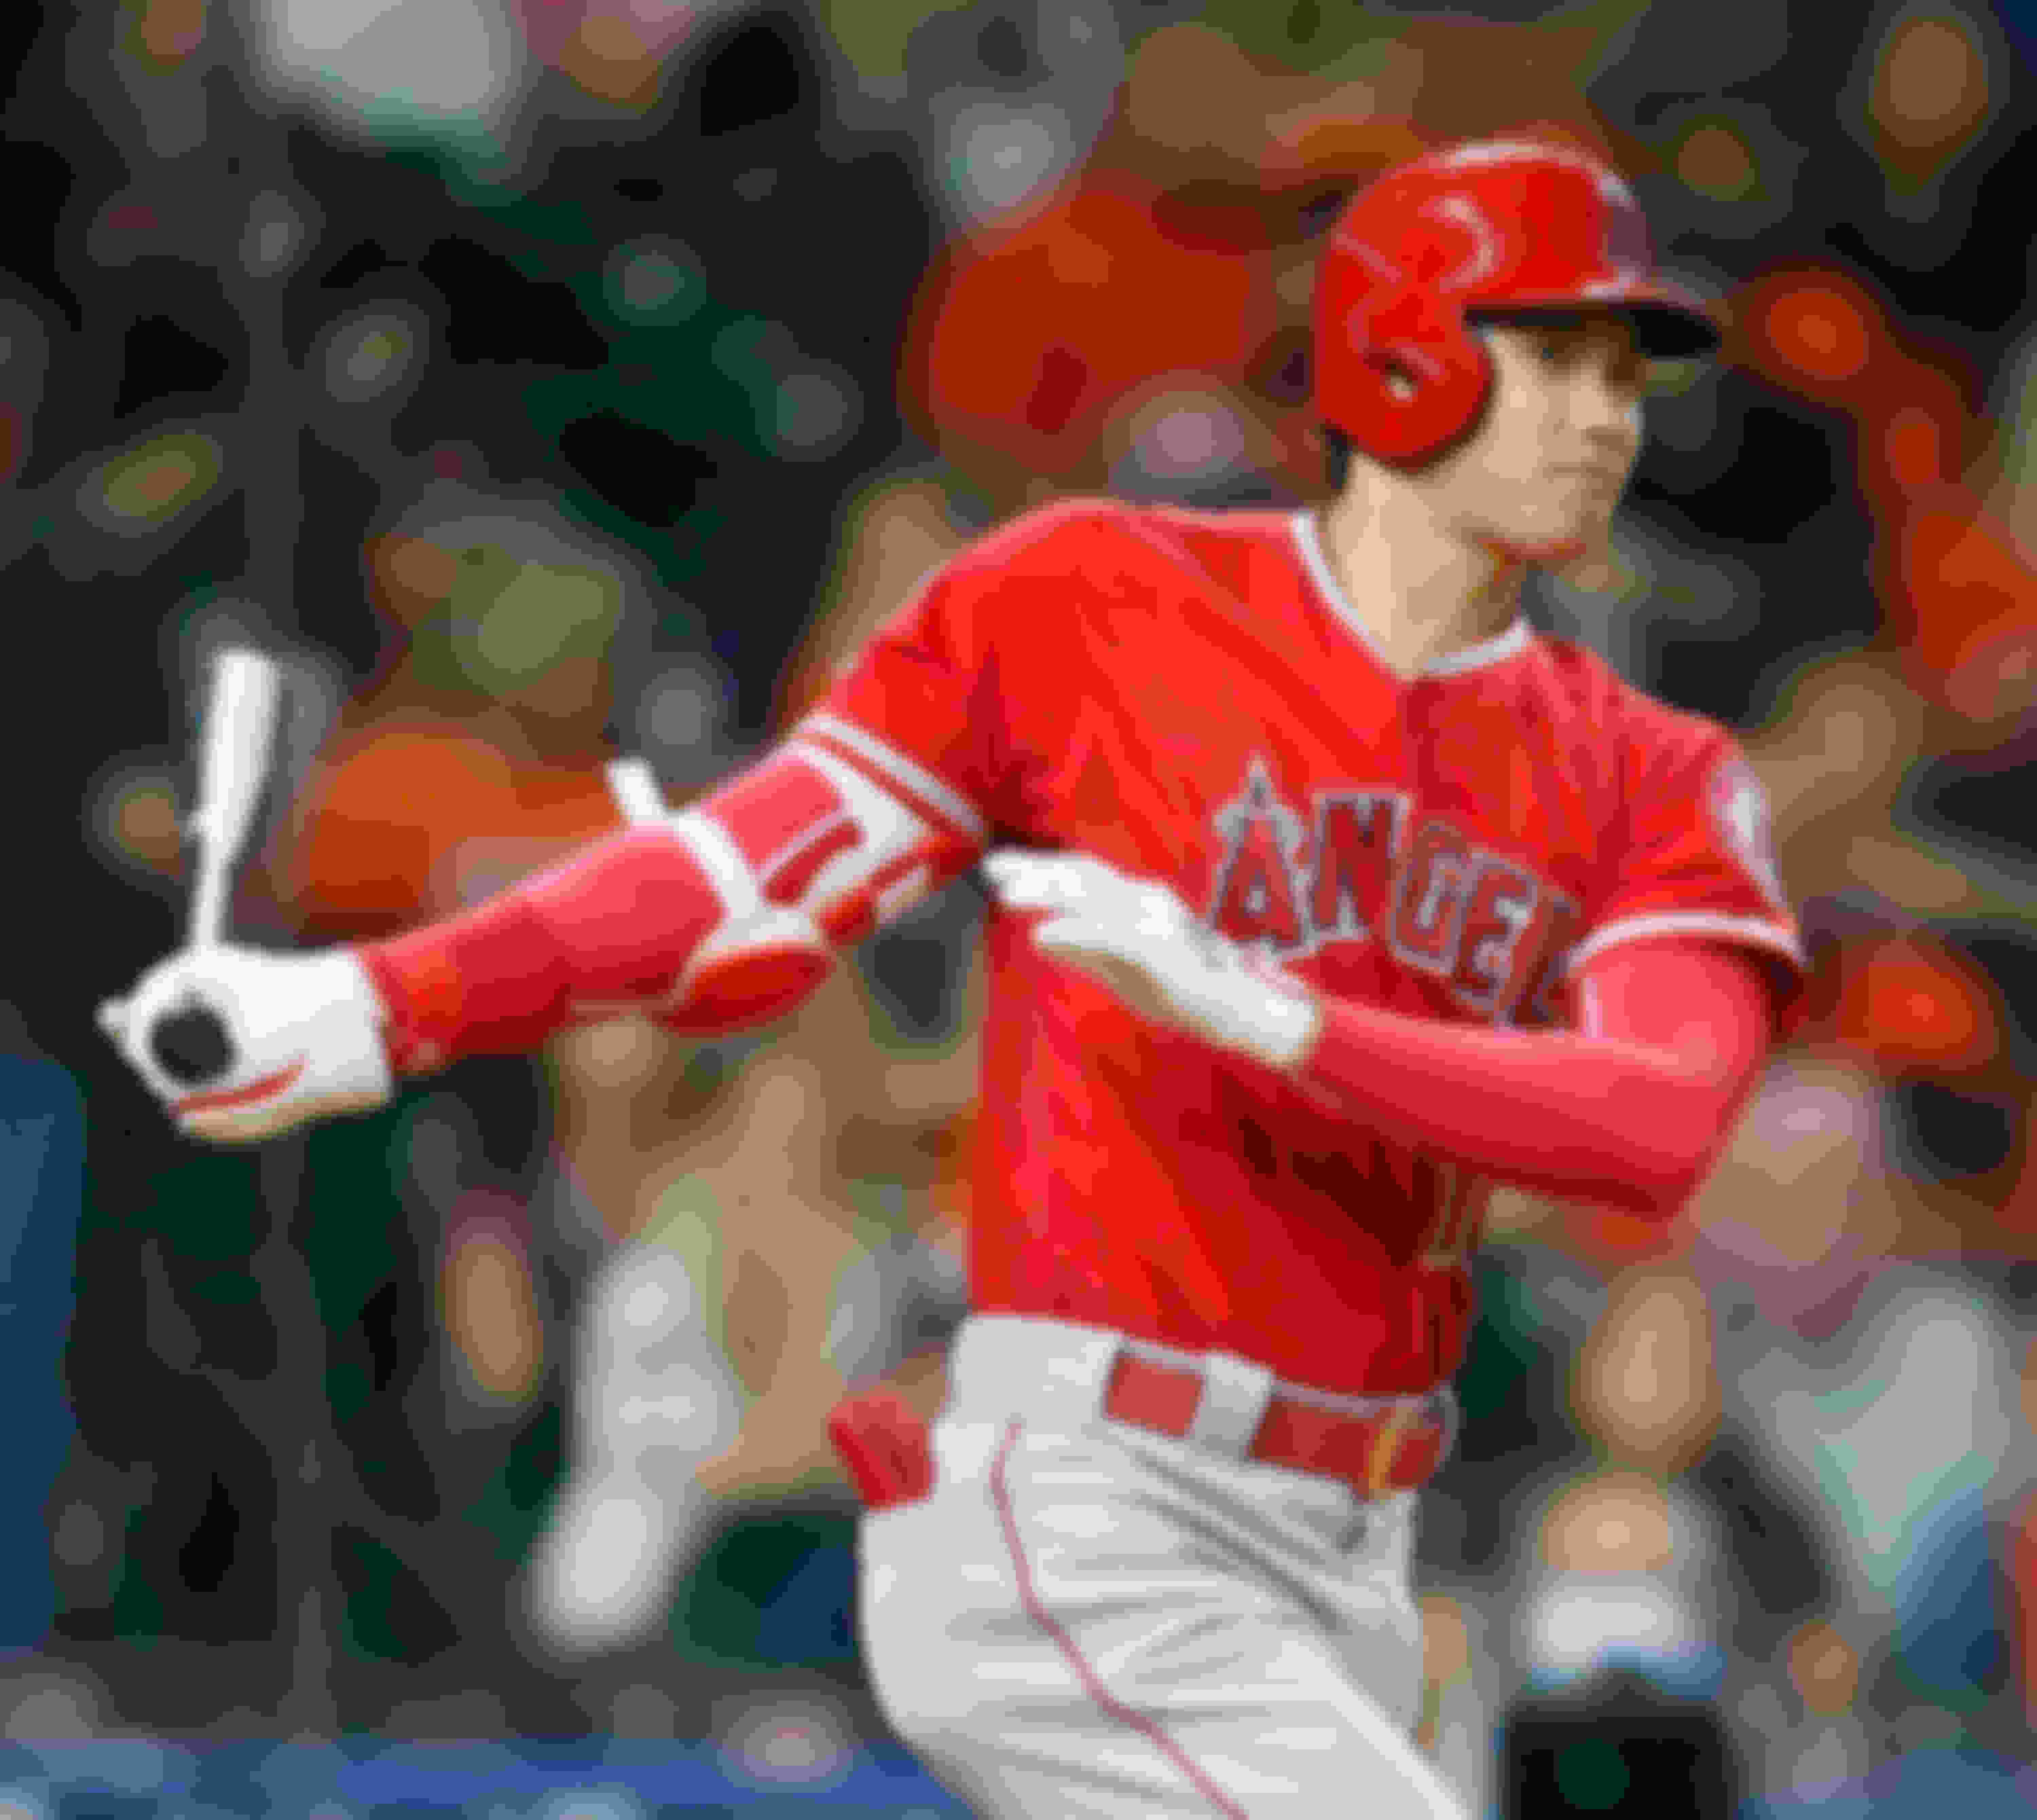 Shohei Ohtani in action for the Los Angeles Angels